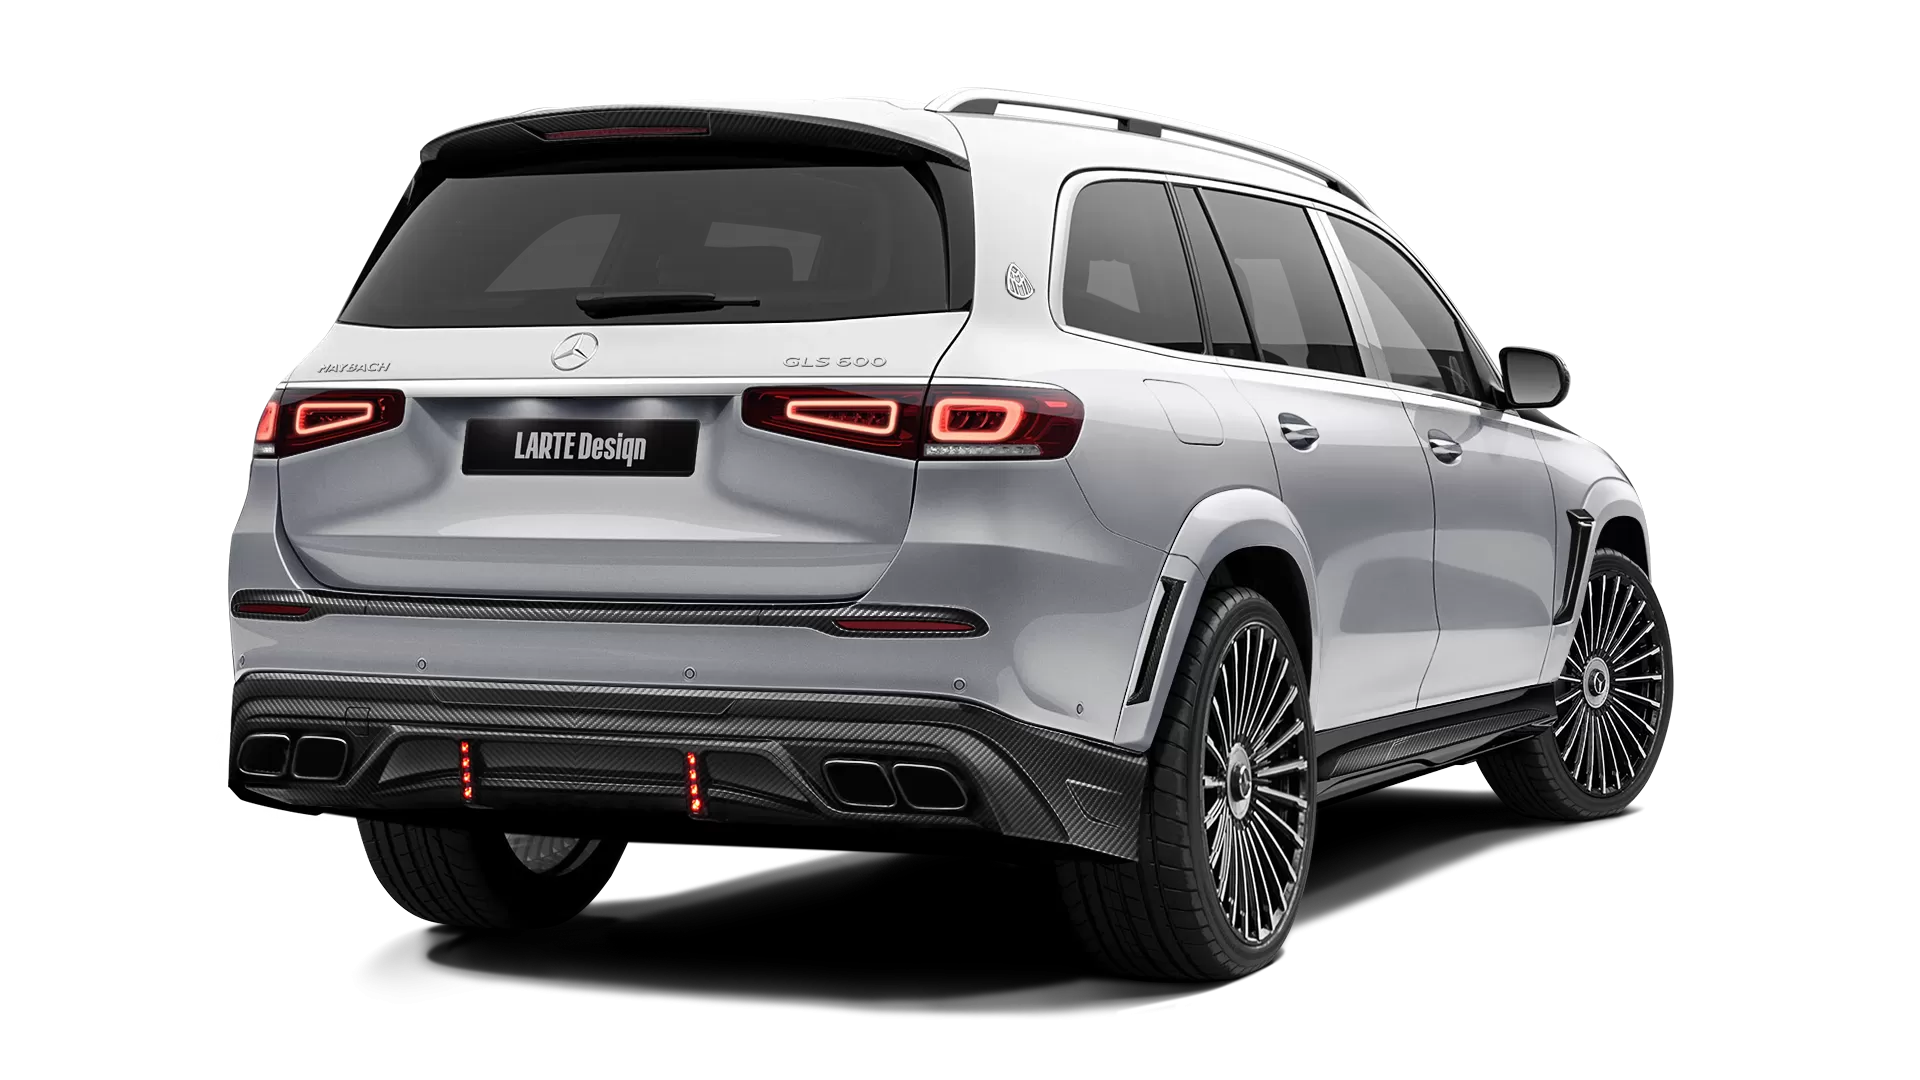 Mercedes Maybach GLS 600 with carbon body kit: back view shown in High Tech Silver & Diamond White